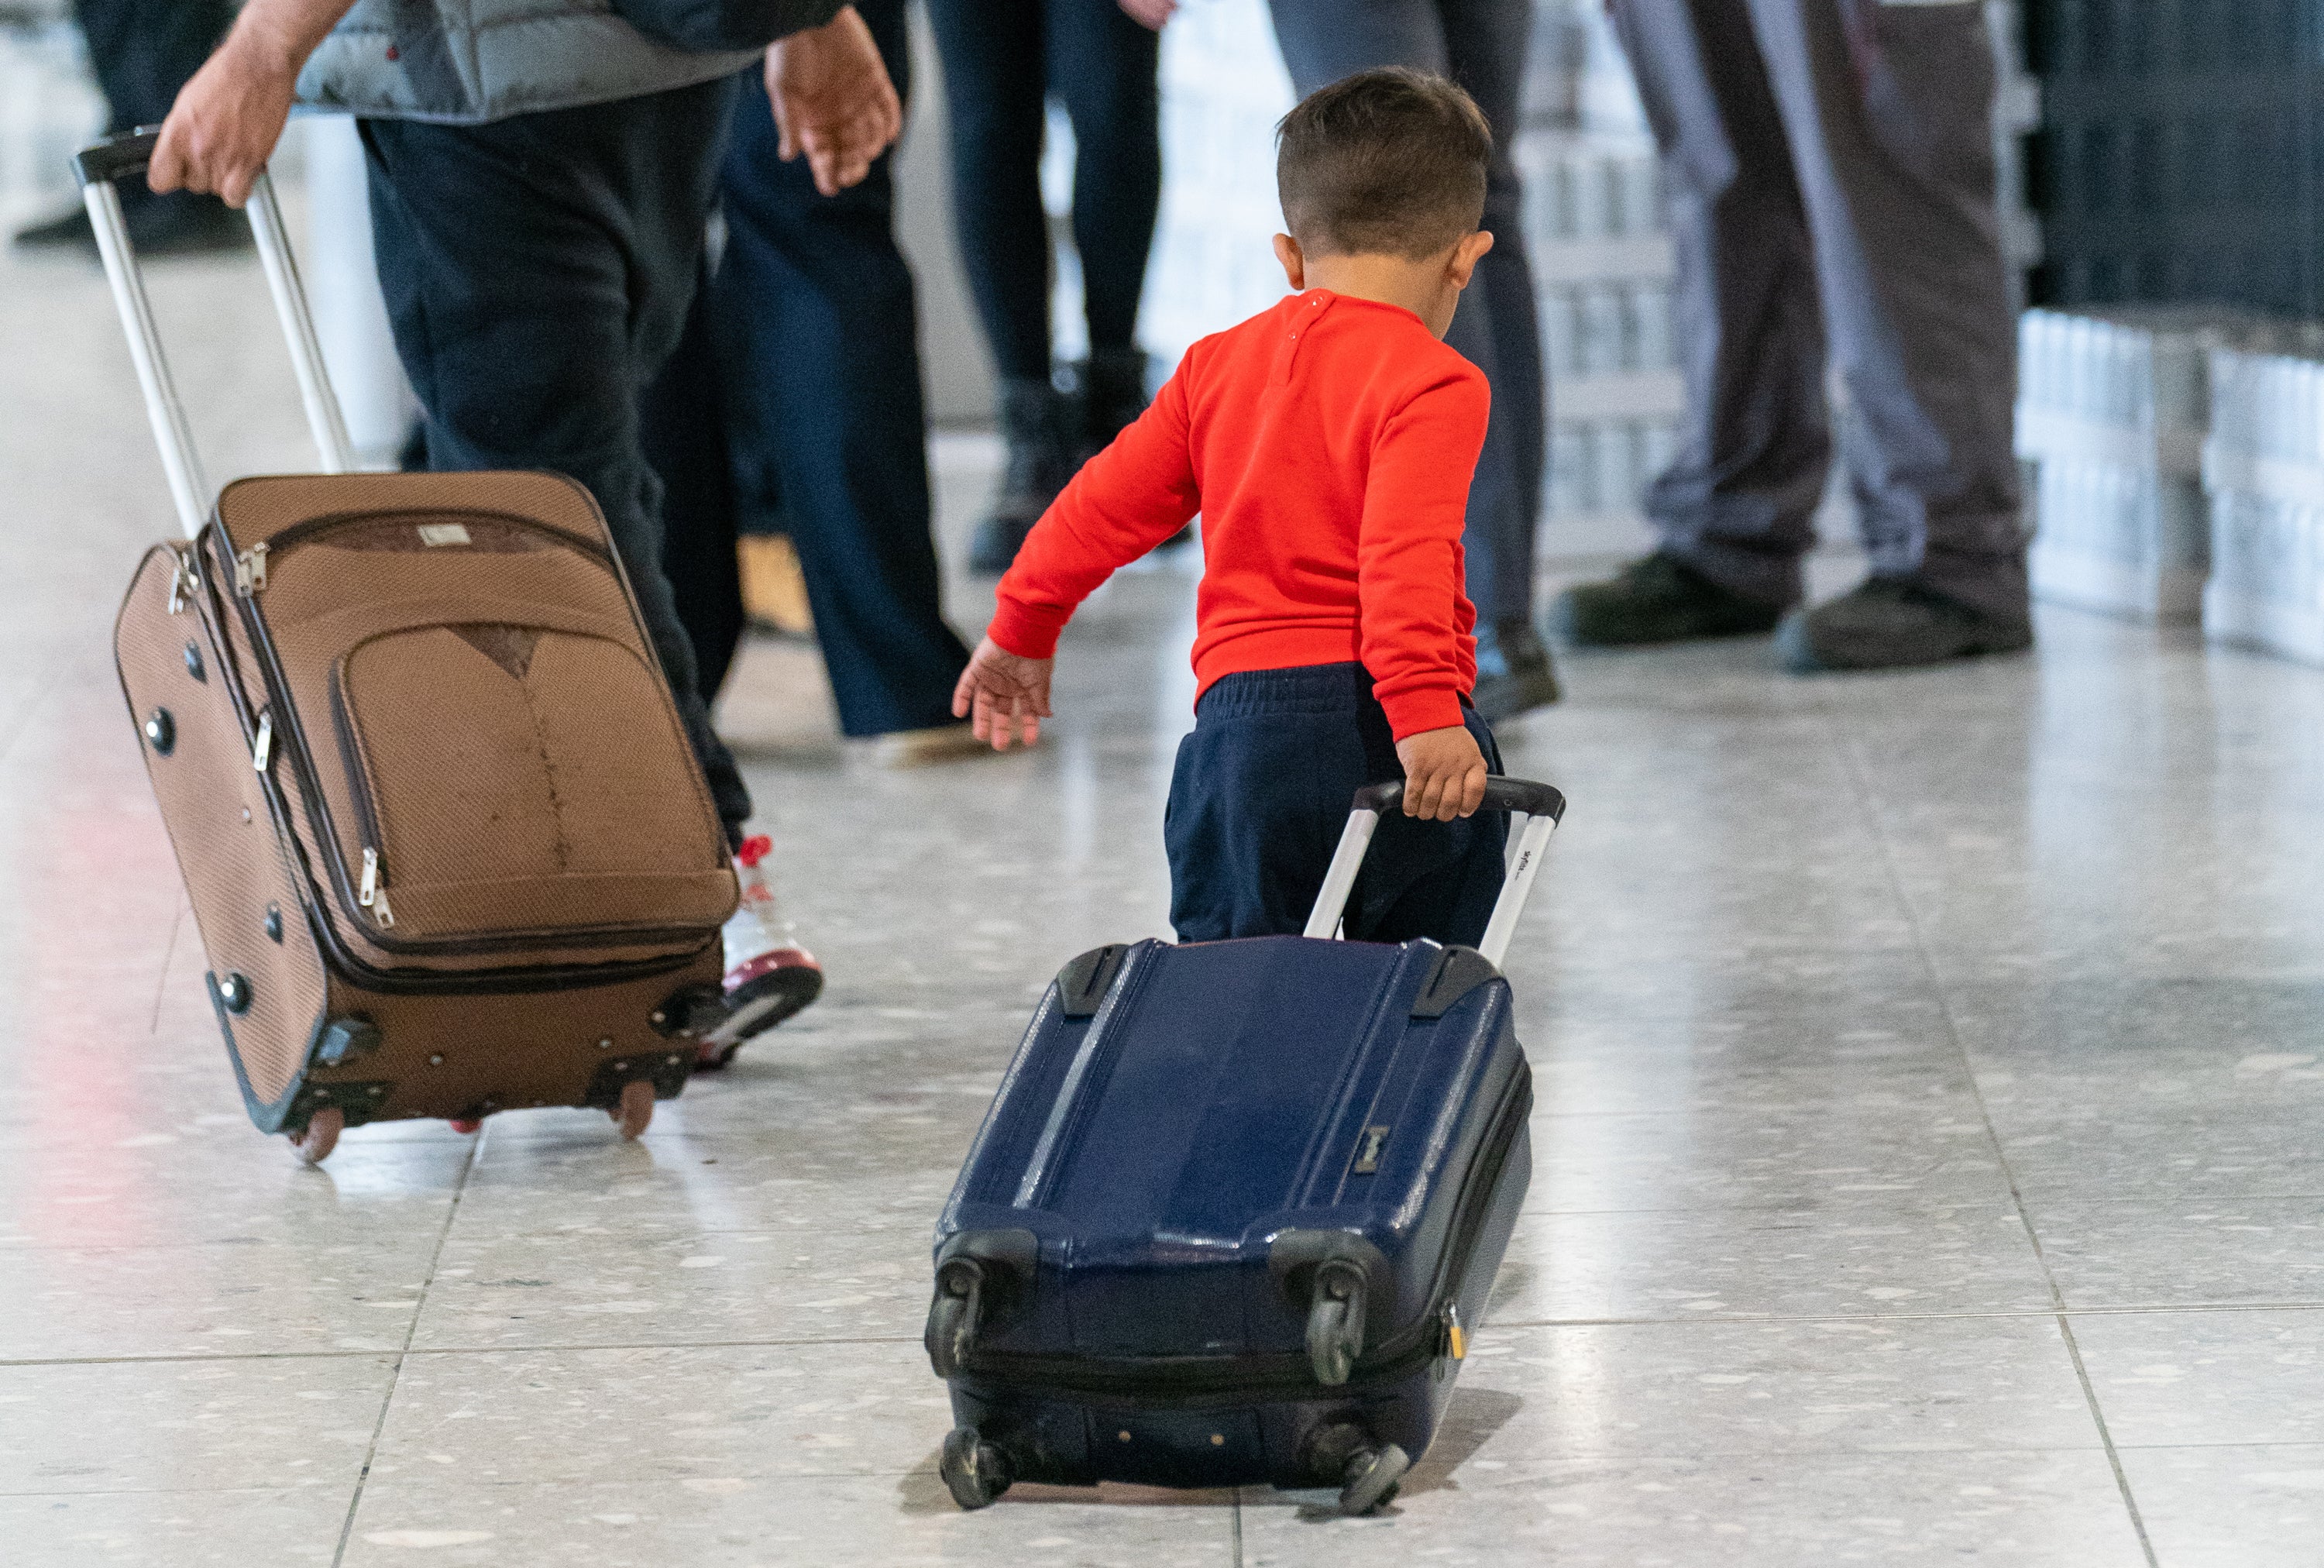 A young boy pulling a suitcase as refugees arrive from Afghanistan at Heathrow Airport, London.